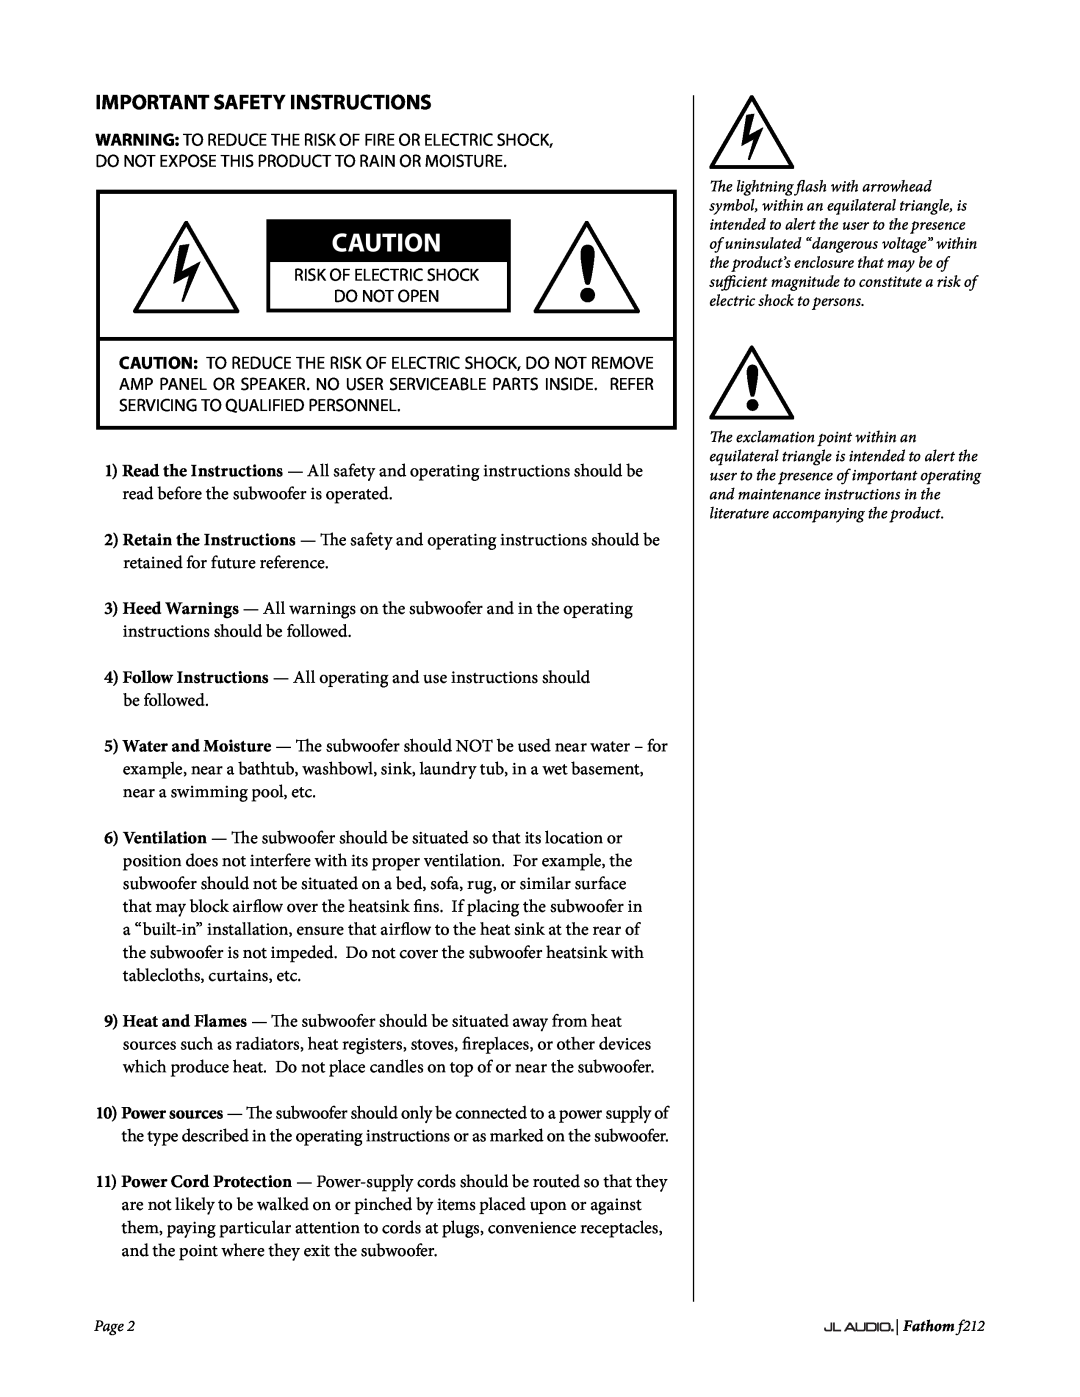 JL Audio f212 owner manual Important Safety Instructions, Risk Of Electric Shock Do Not Open 